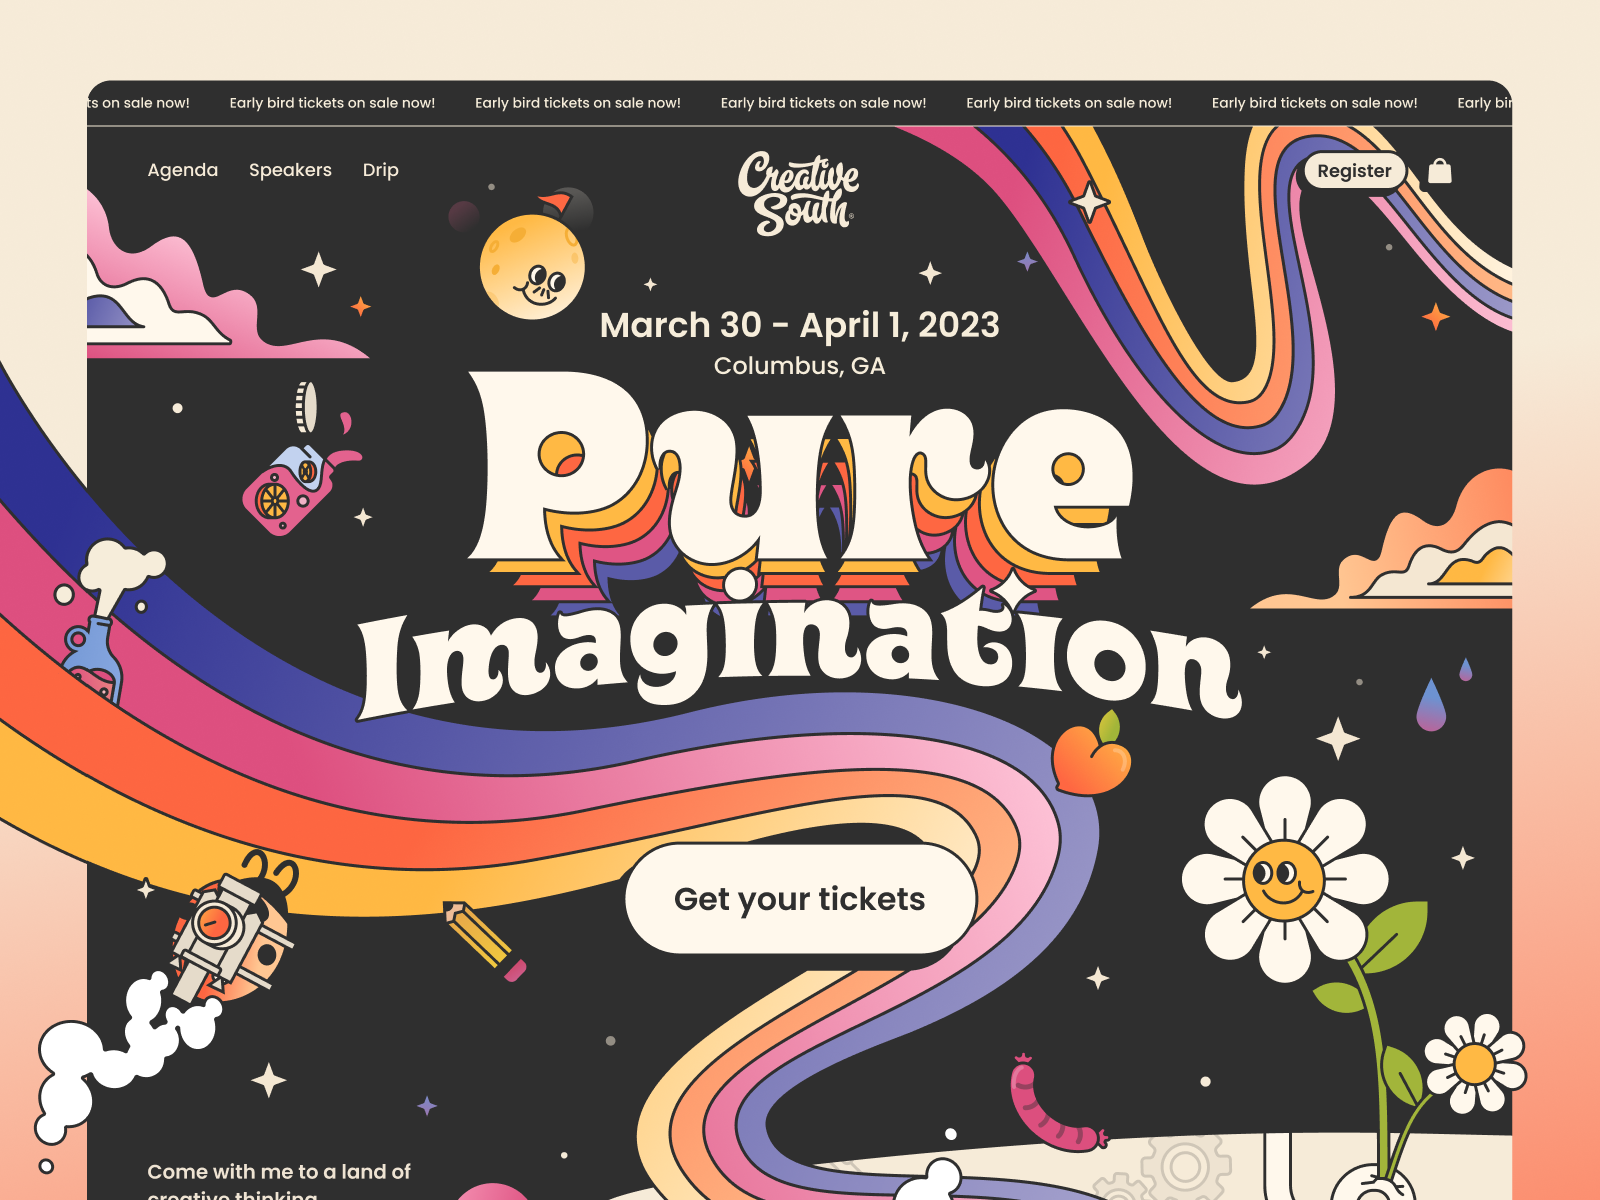 Creative South Web Design by Benten Woodring for Heyo on Dribbble